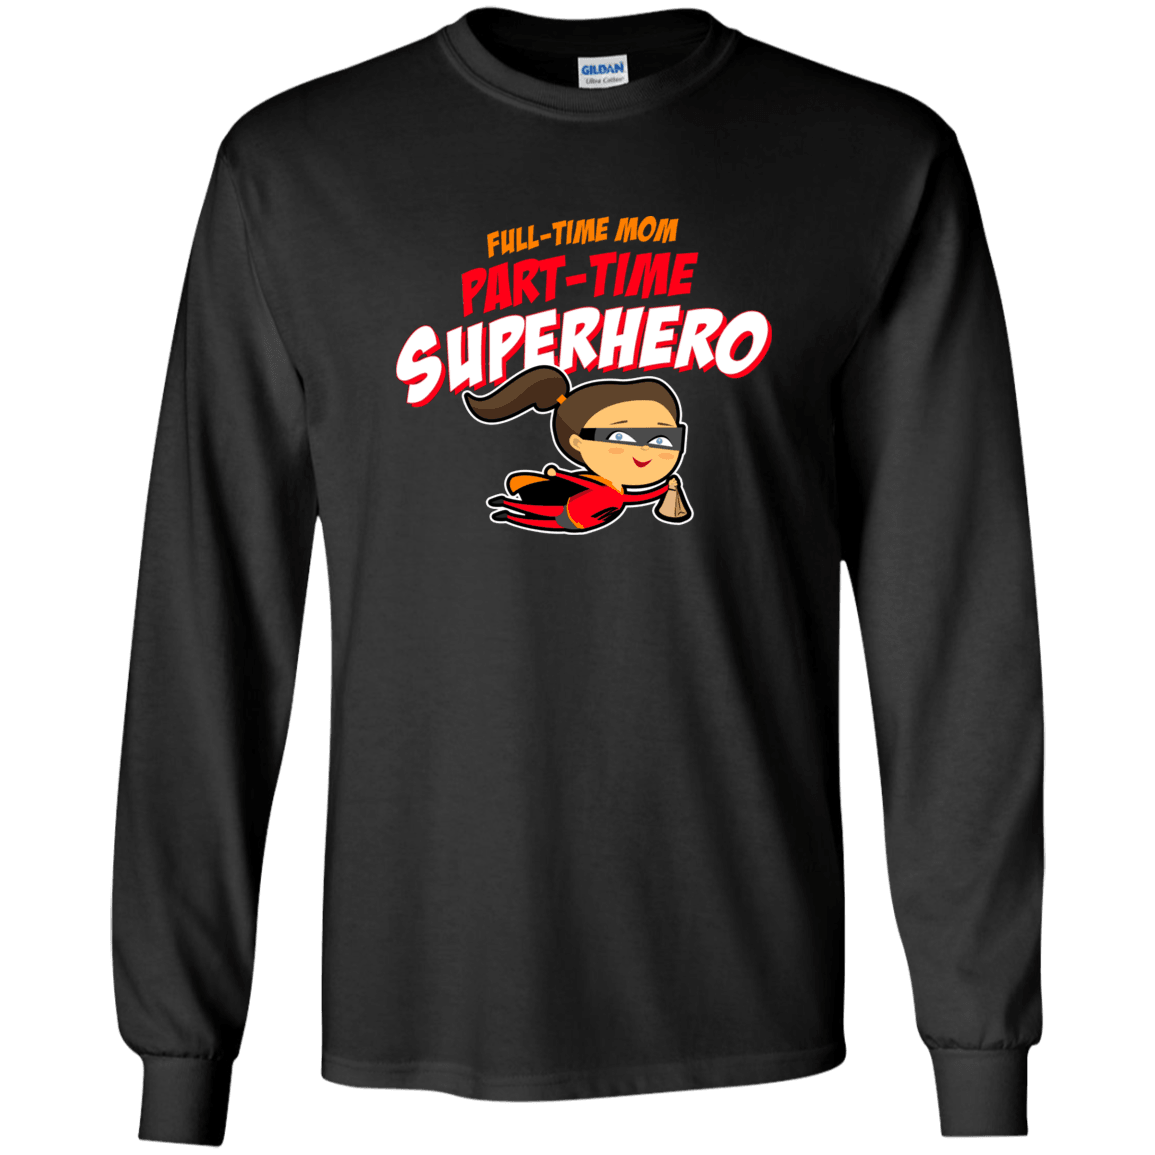 Designs by MyUtopia Shout Out:Full-time Mom Part-Time Superhero Long Sleeve Ultra Cotton T-Shirt,Black / S,Long Sleeve T-Shirts